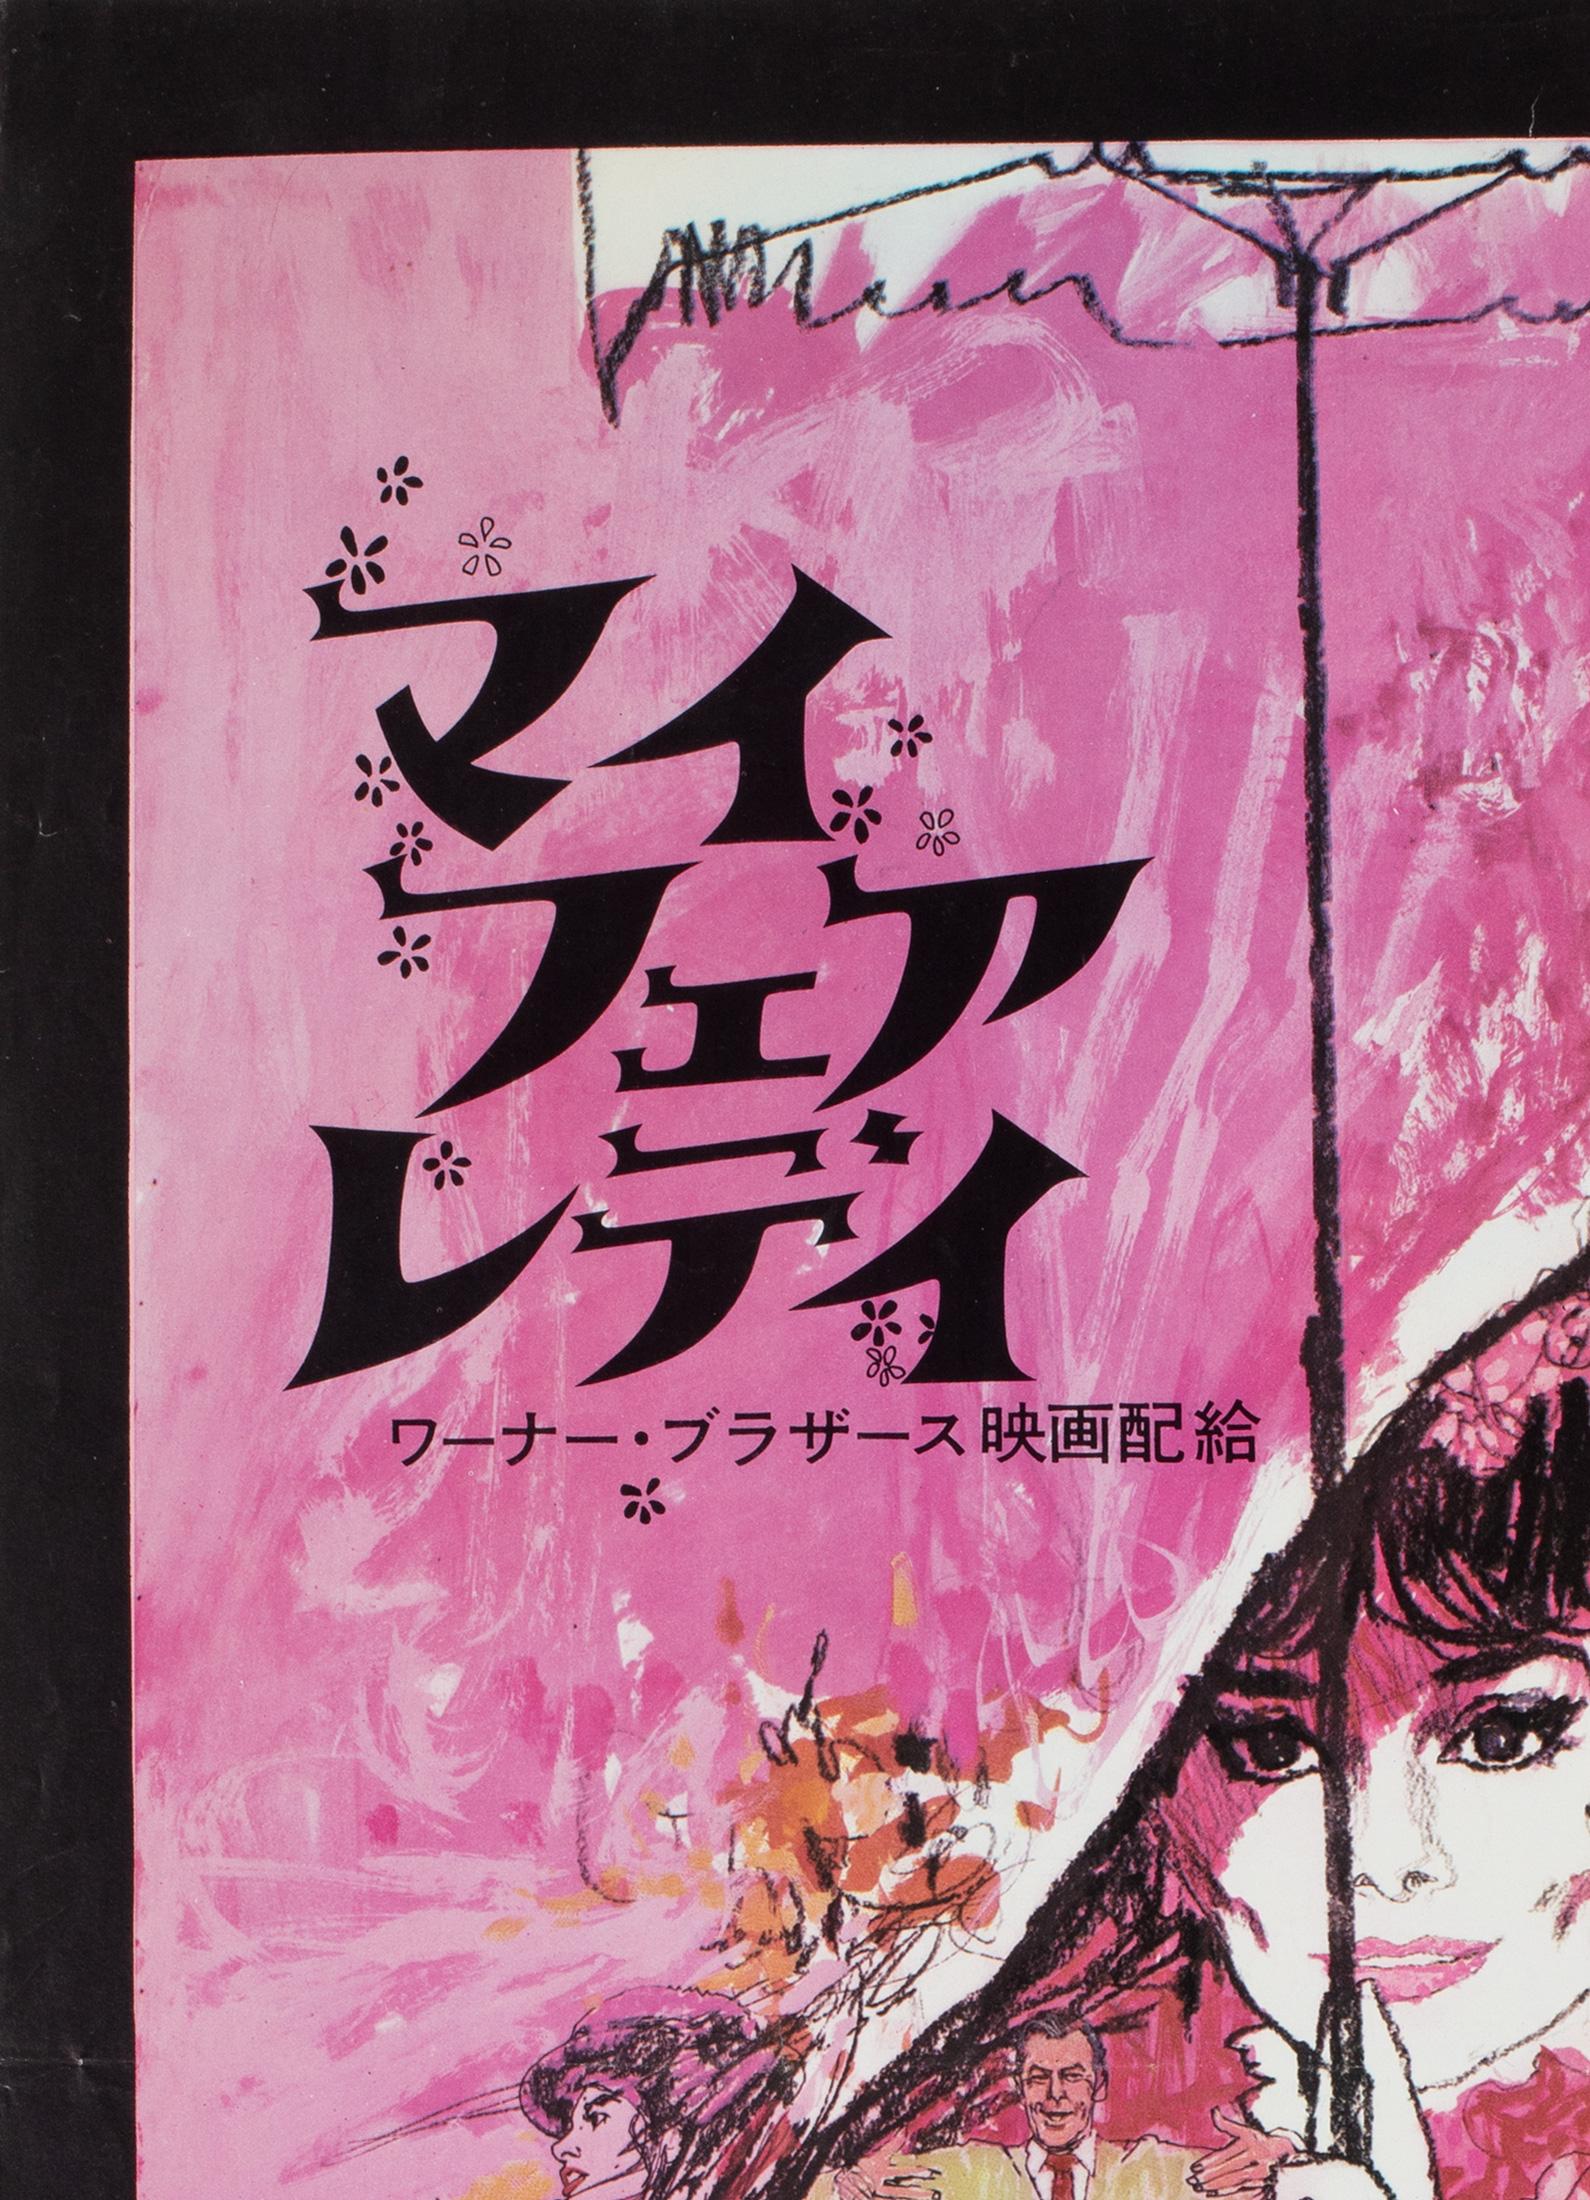 My Fair Lady Japanese Film Movie Poster, R1969, Bob Peak & Bill Gold In Excellent Condition For Sale In Bath, Somerset